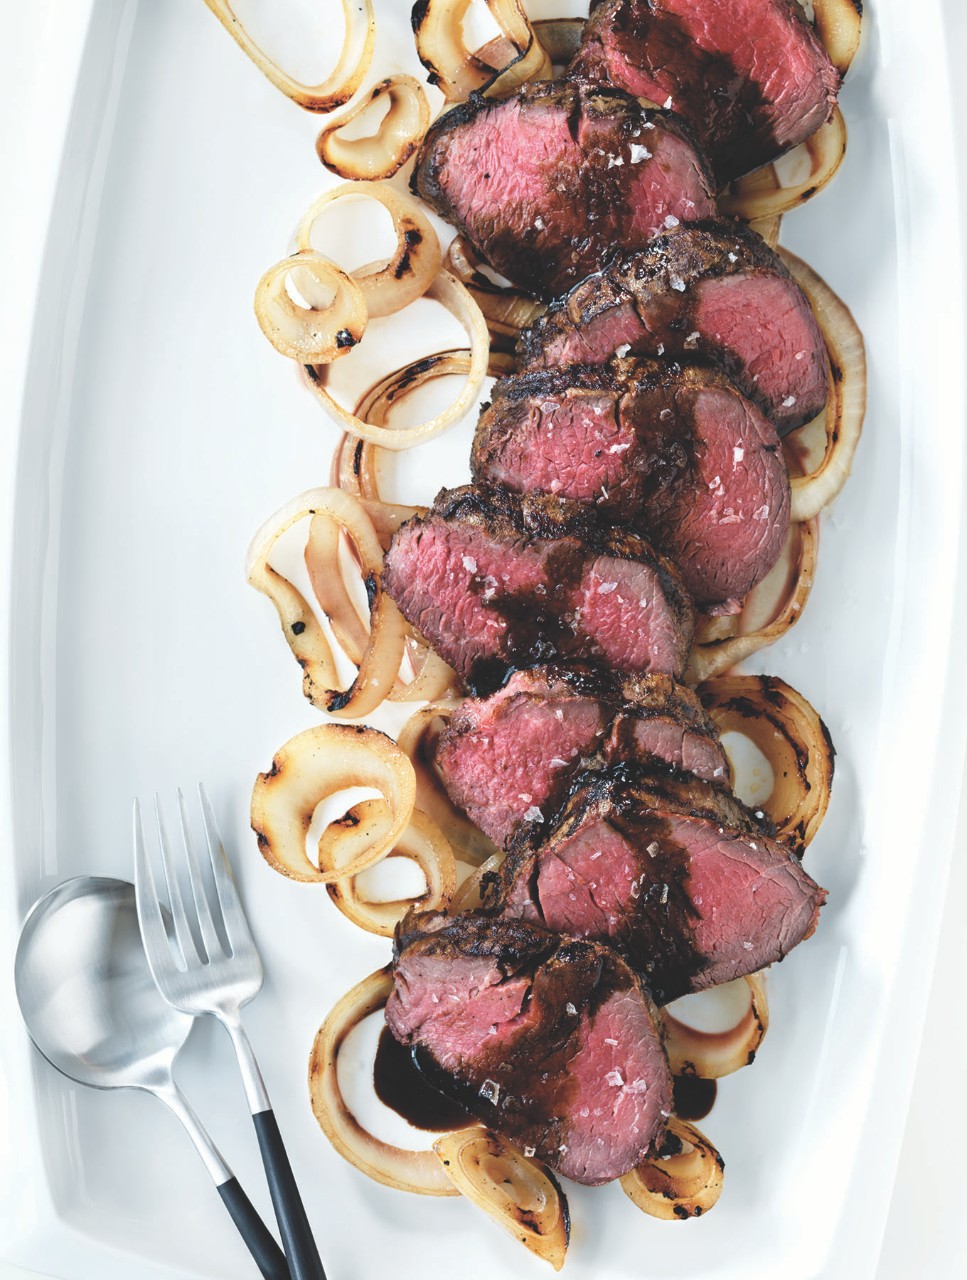 Beef Tenderloin with Asian Flavourings